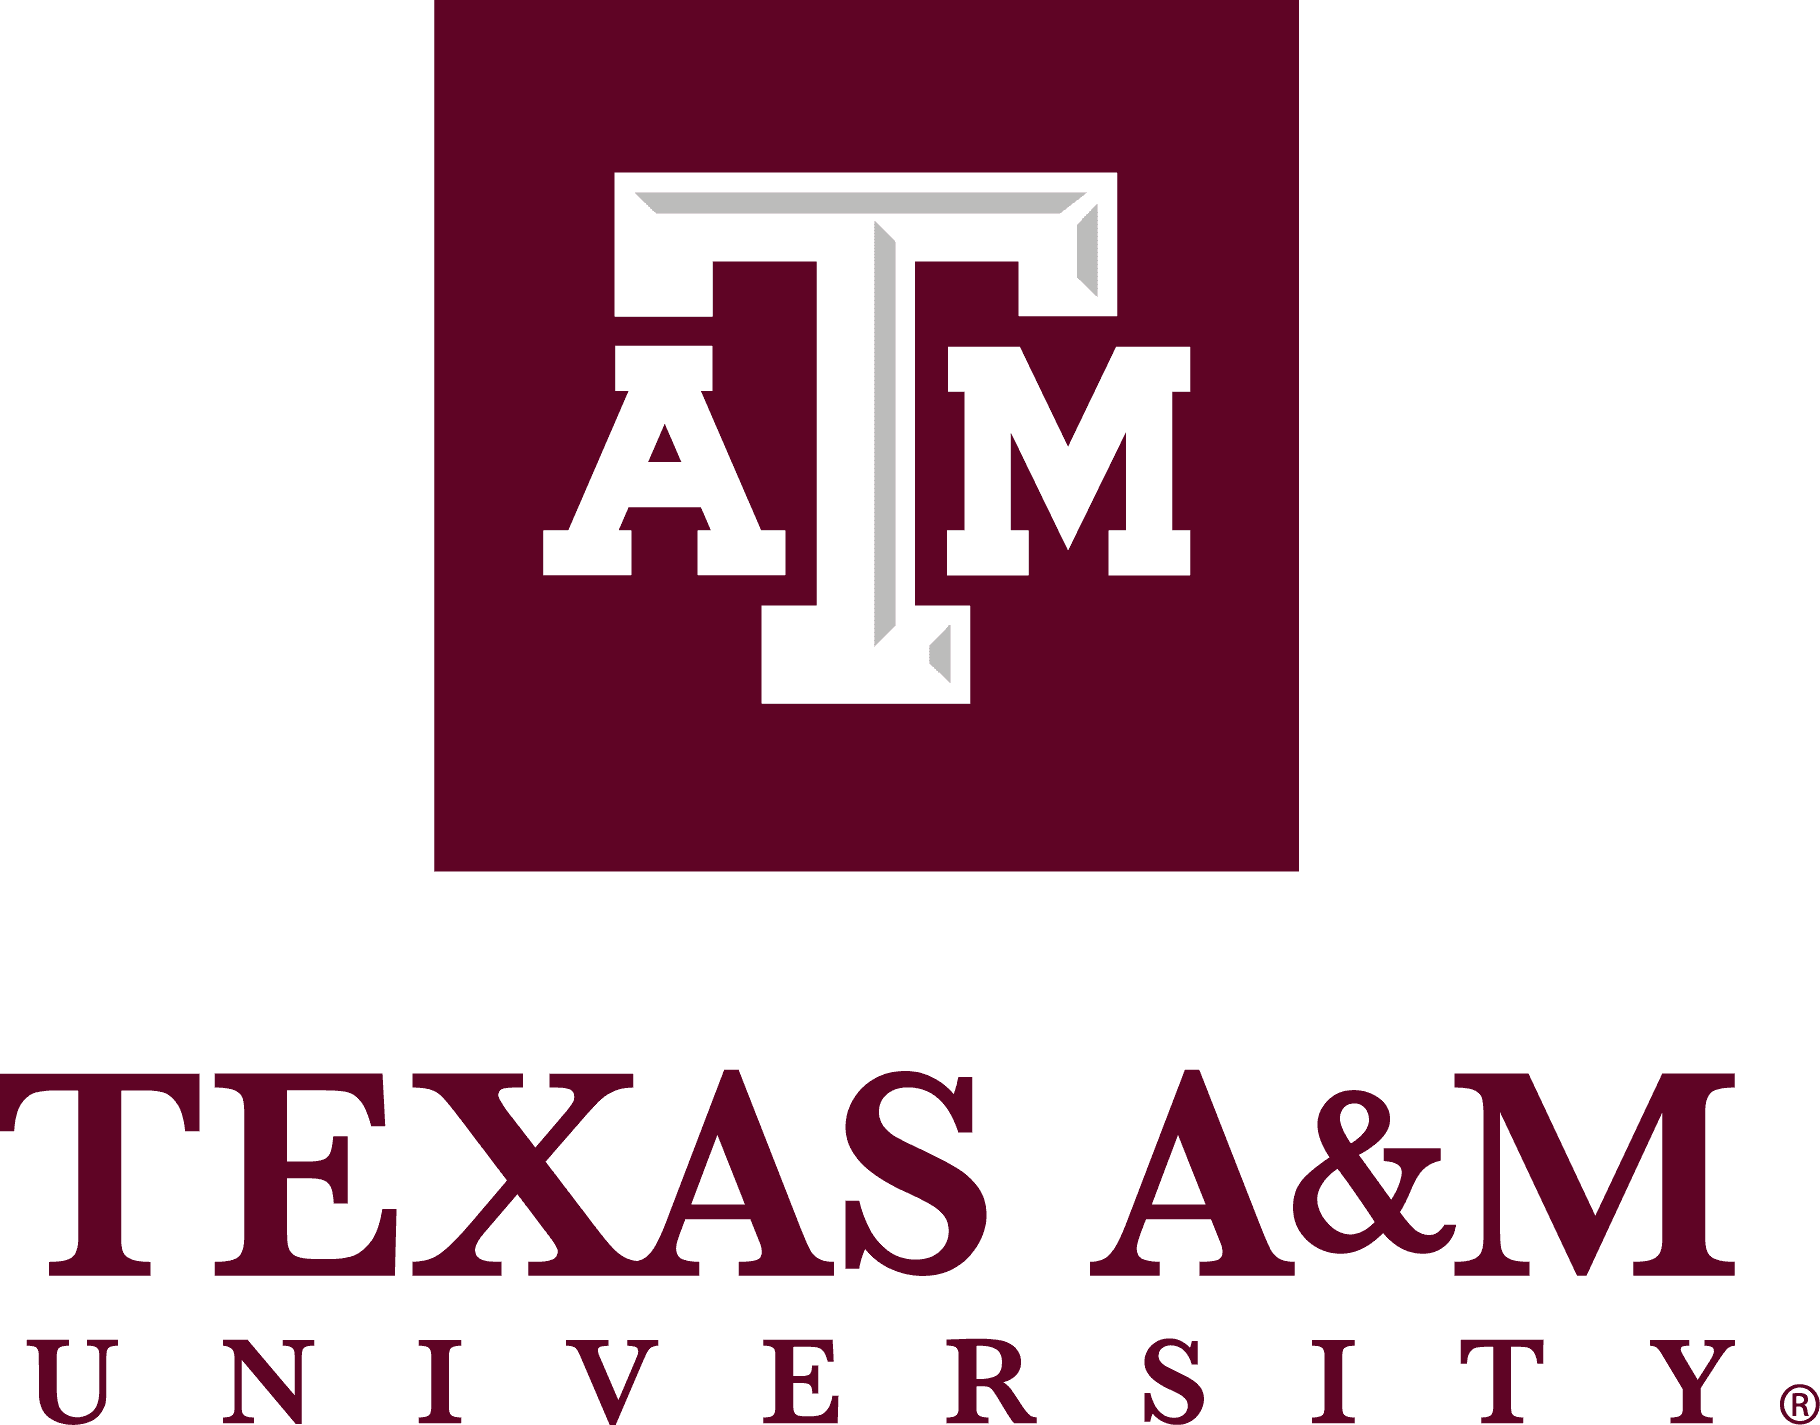 5 Health and Wellness Services at Texas A&M University - OneClass Blog1820 x 1425